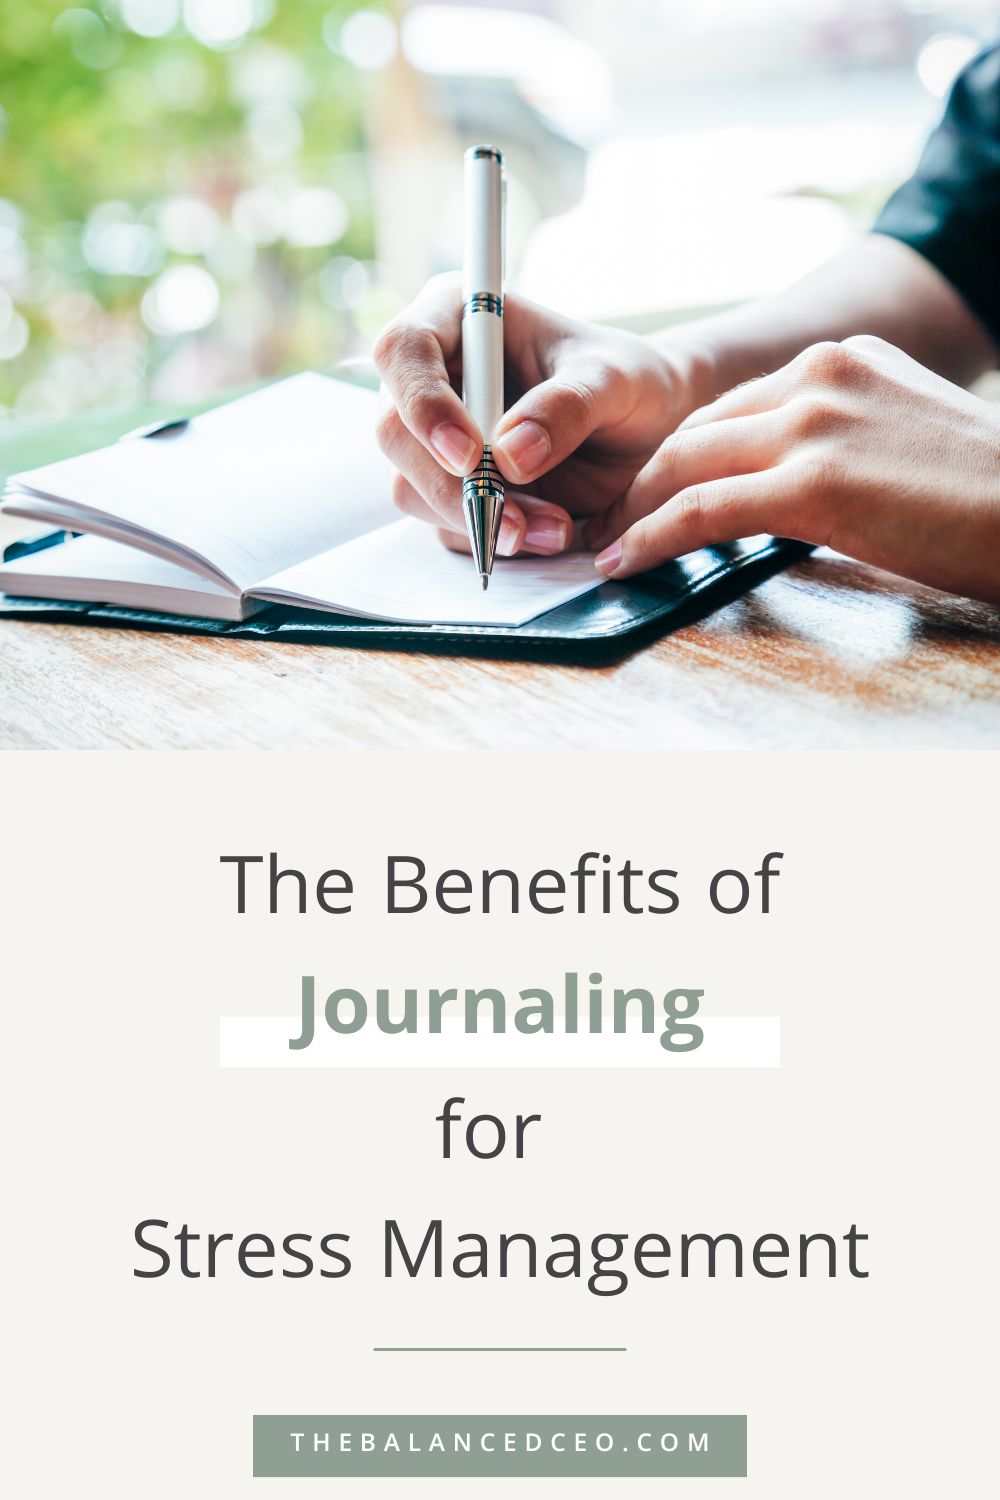 The Benefits of Journaling for Stress Management